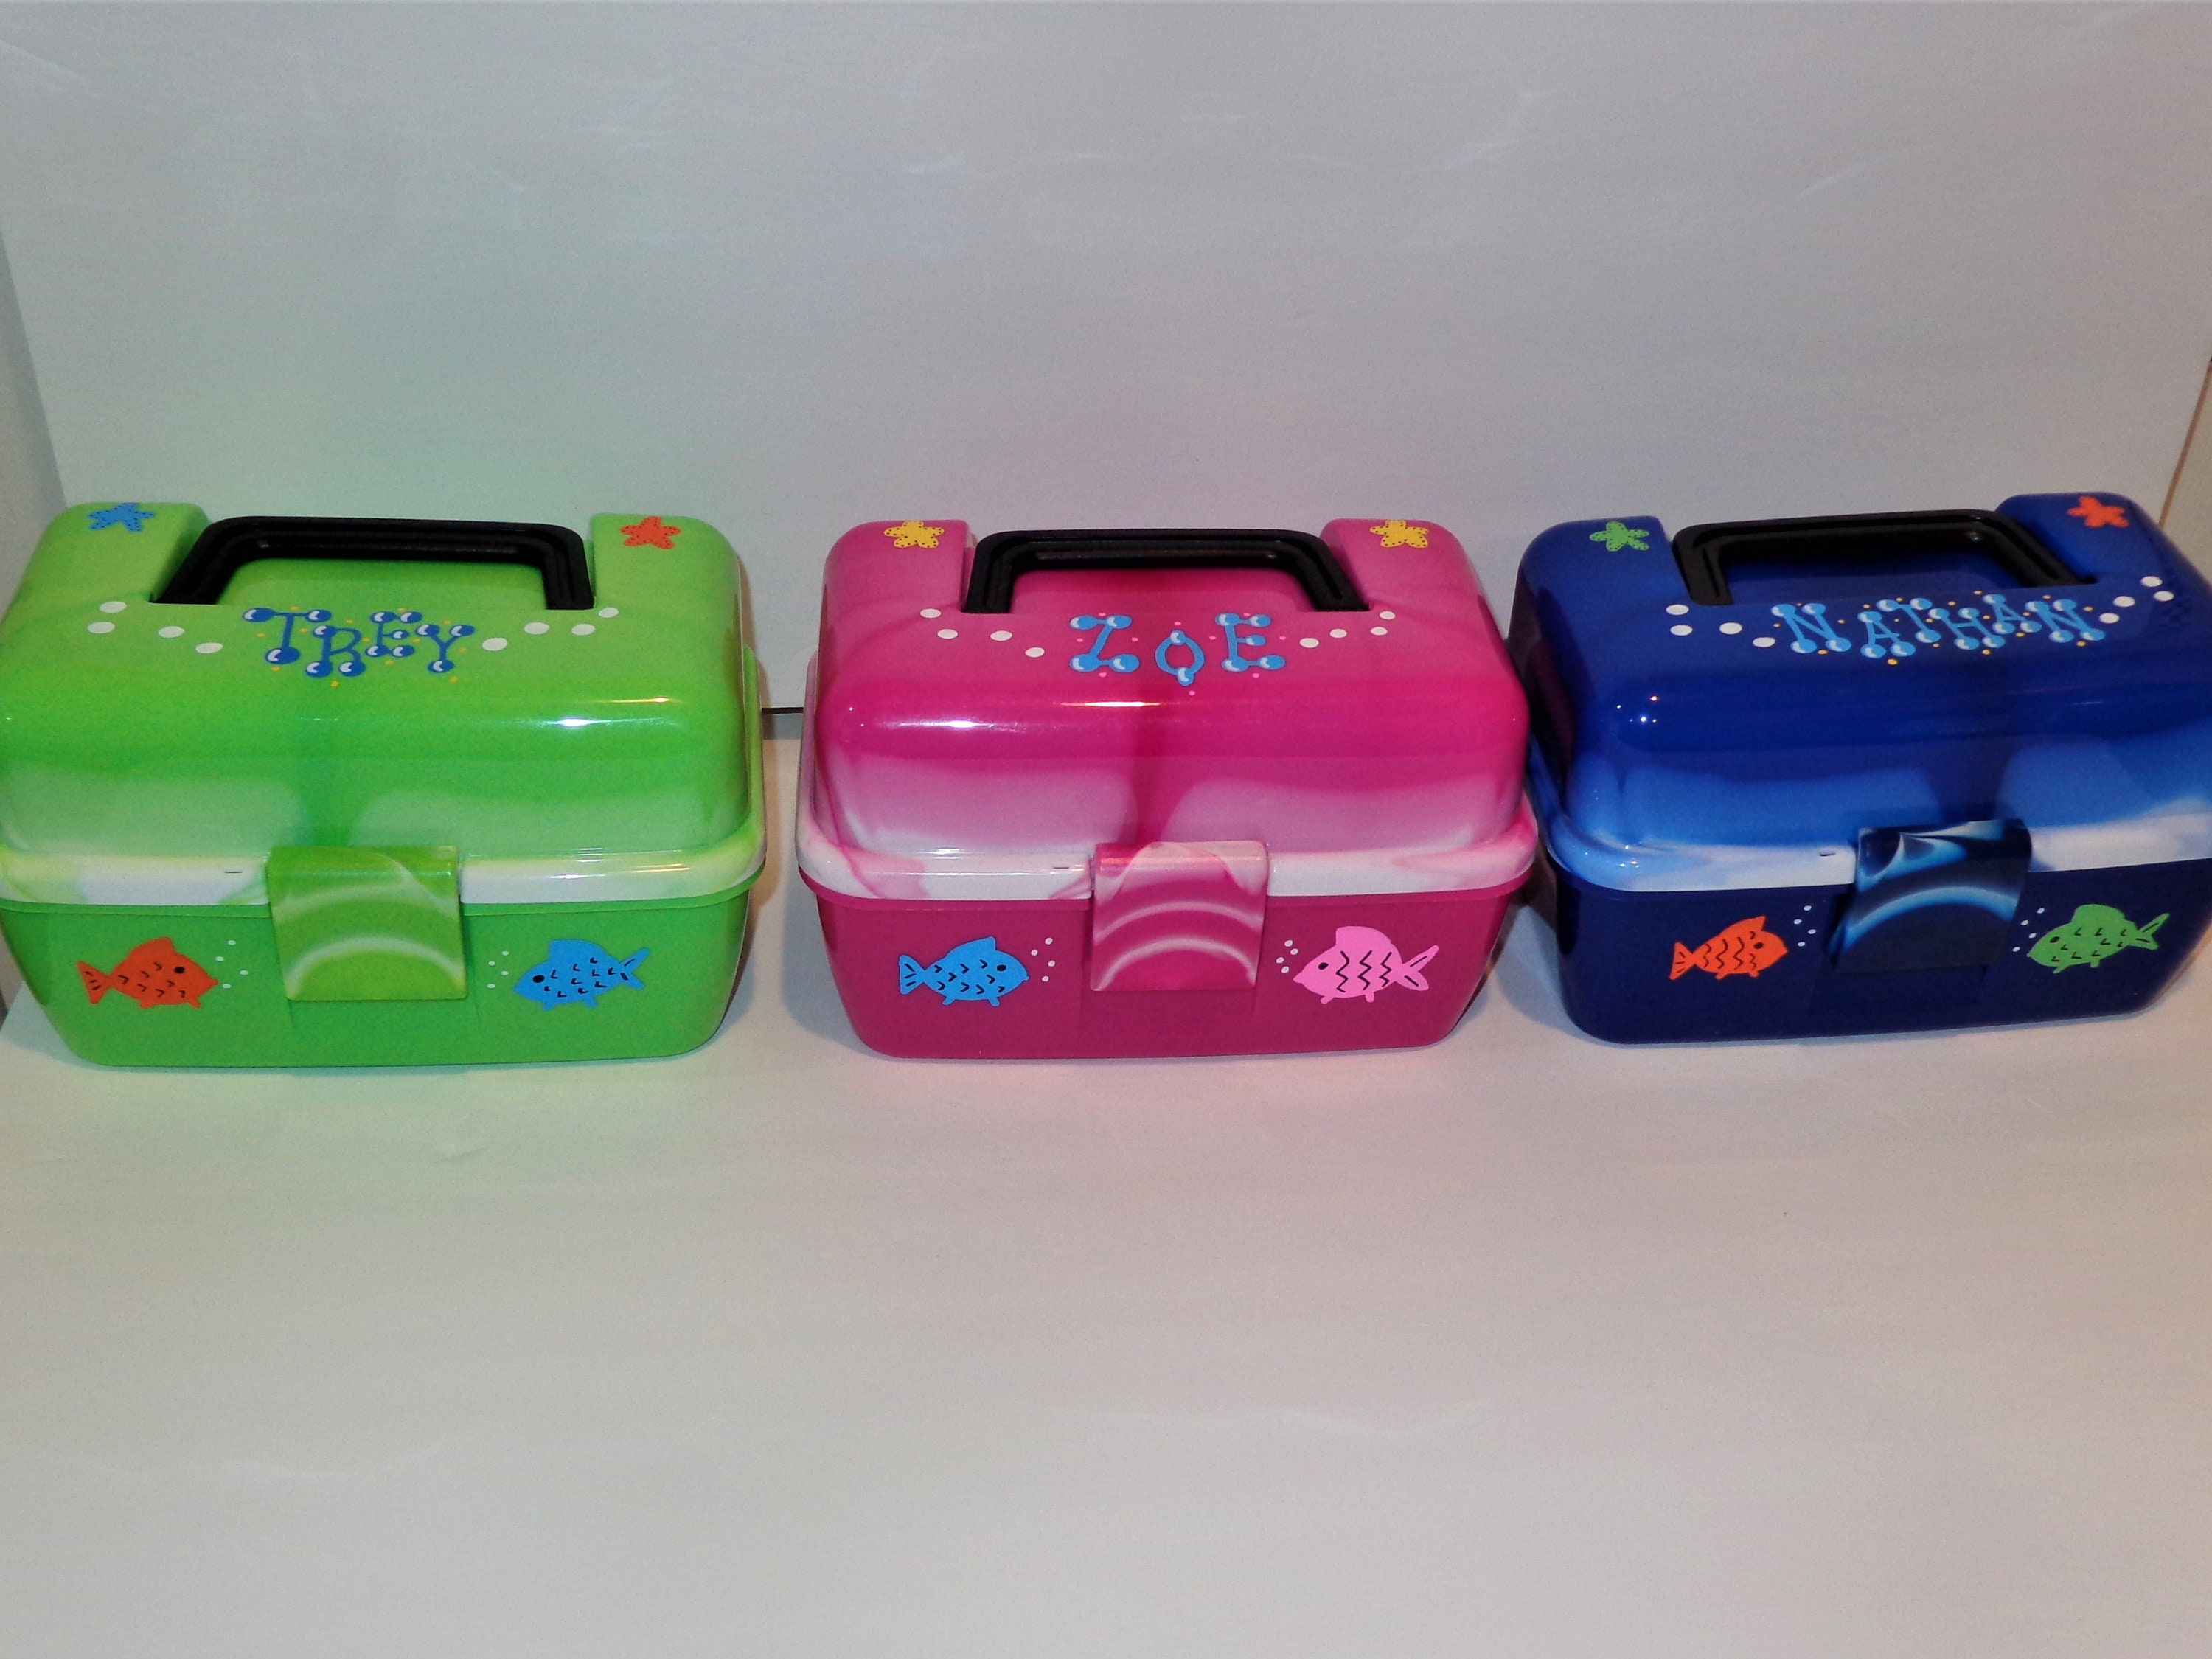 Personalized Tackle Box 